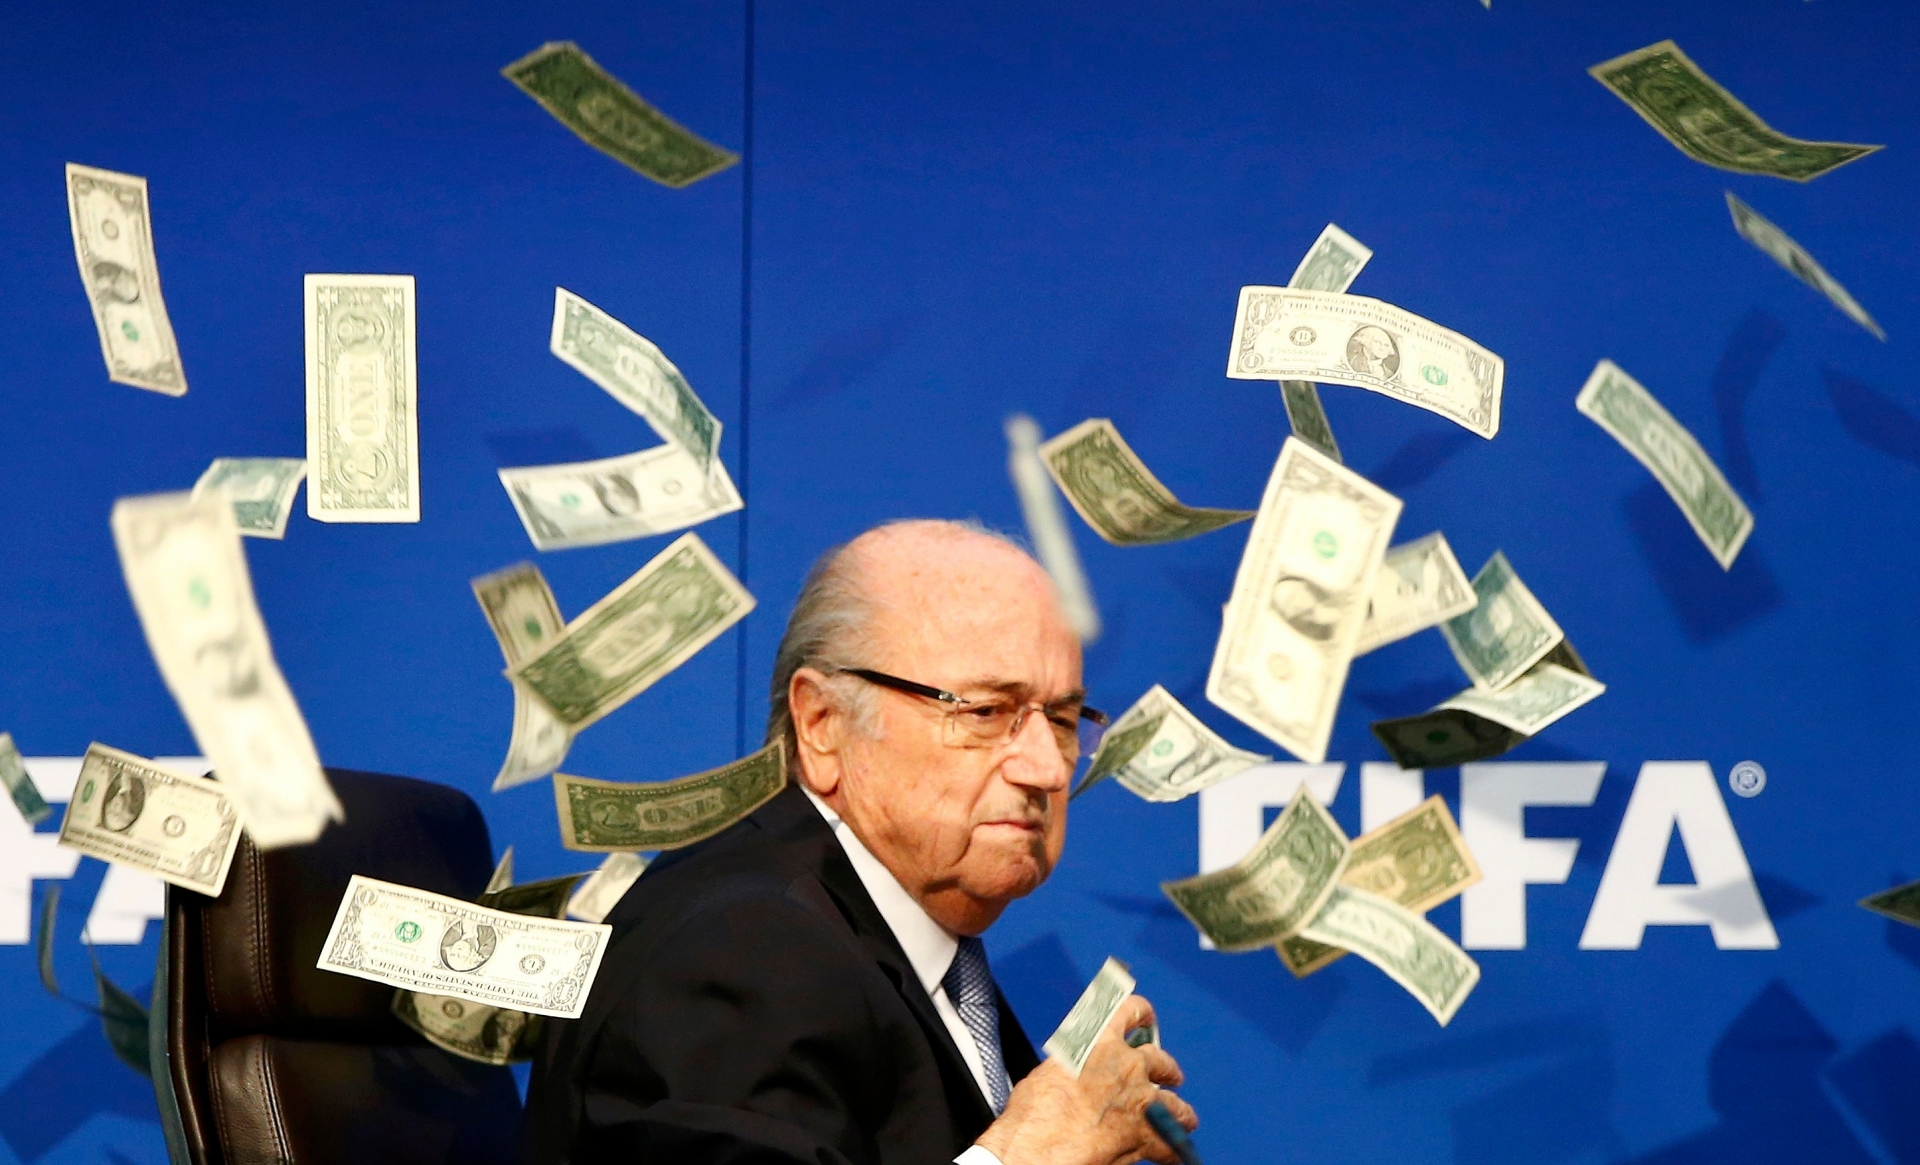 British comedian known as Lee Nelson (unseen) throws banknotes at FIFA President Sepp Blatter as he arrives for a news conference after the Extraordinary FIFA Executive Committee Meeting at the FIFA headquarters in Zurich, Switzerland July 20, 2015. World football's troubled governing body FIFA will vote for a new president, to replace Sepp Blatter, at a special congress to be held on February 26 in Zurich, the organisation said on Monday.       REUTERS/Arnd Wiegmann blatter Fifa, protesta dell'attore britannico Lee Nelson contro Sepp Blatter